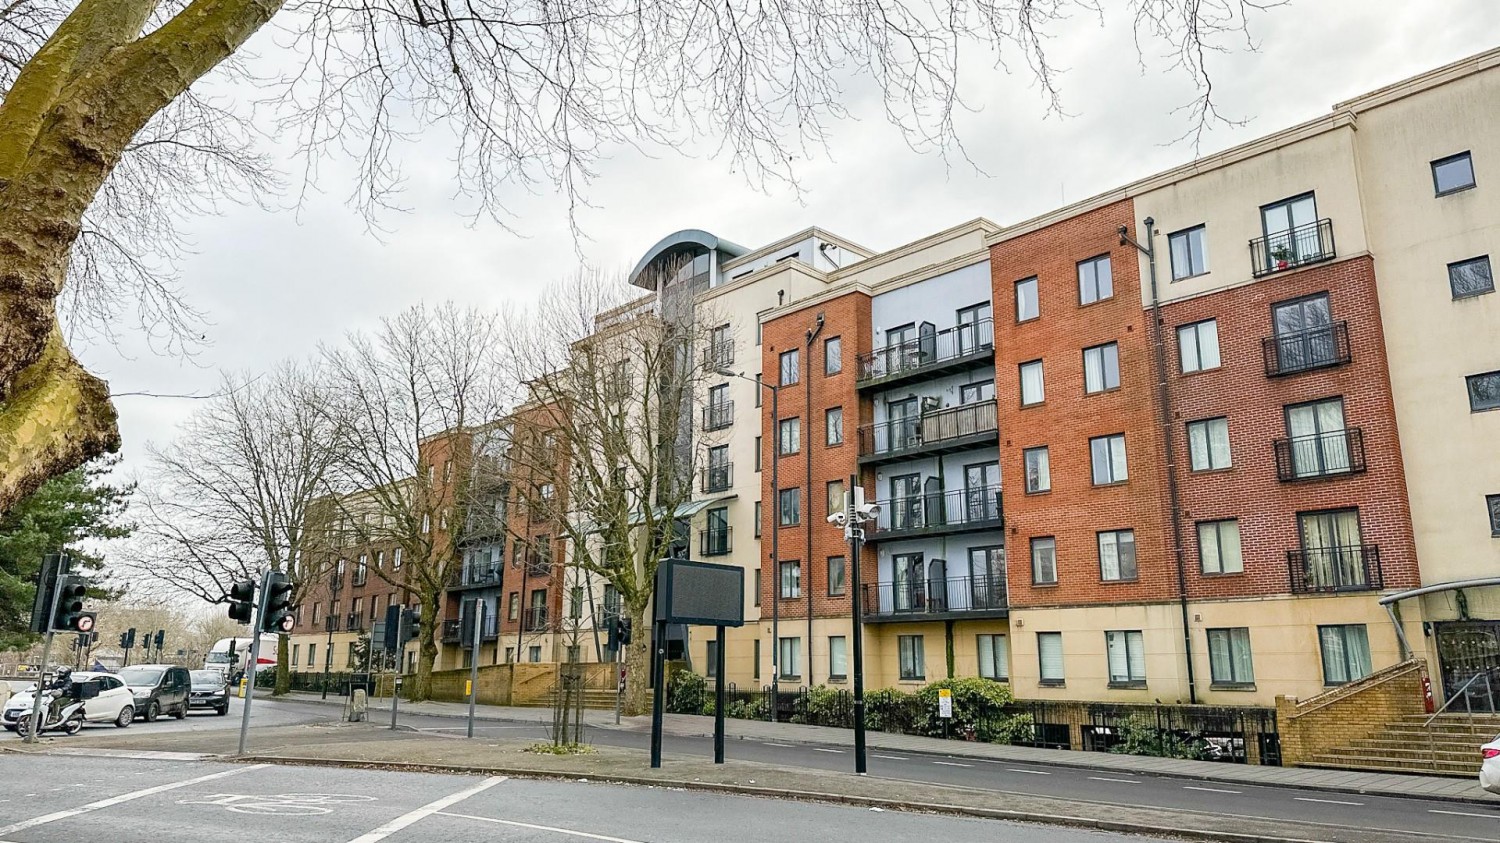 Squires Court, Bedminster Parade, Bristol, BS3 4BX